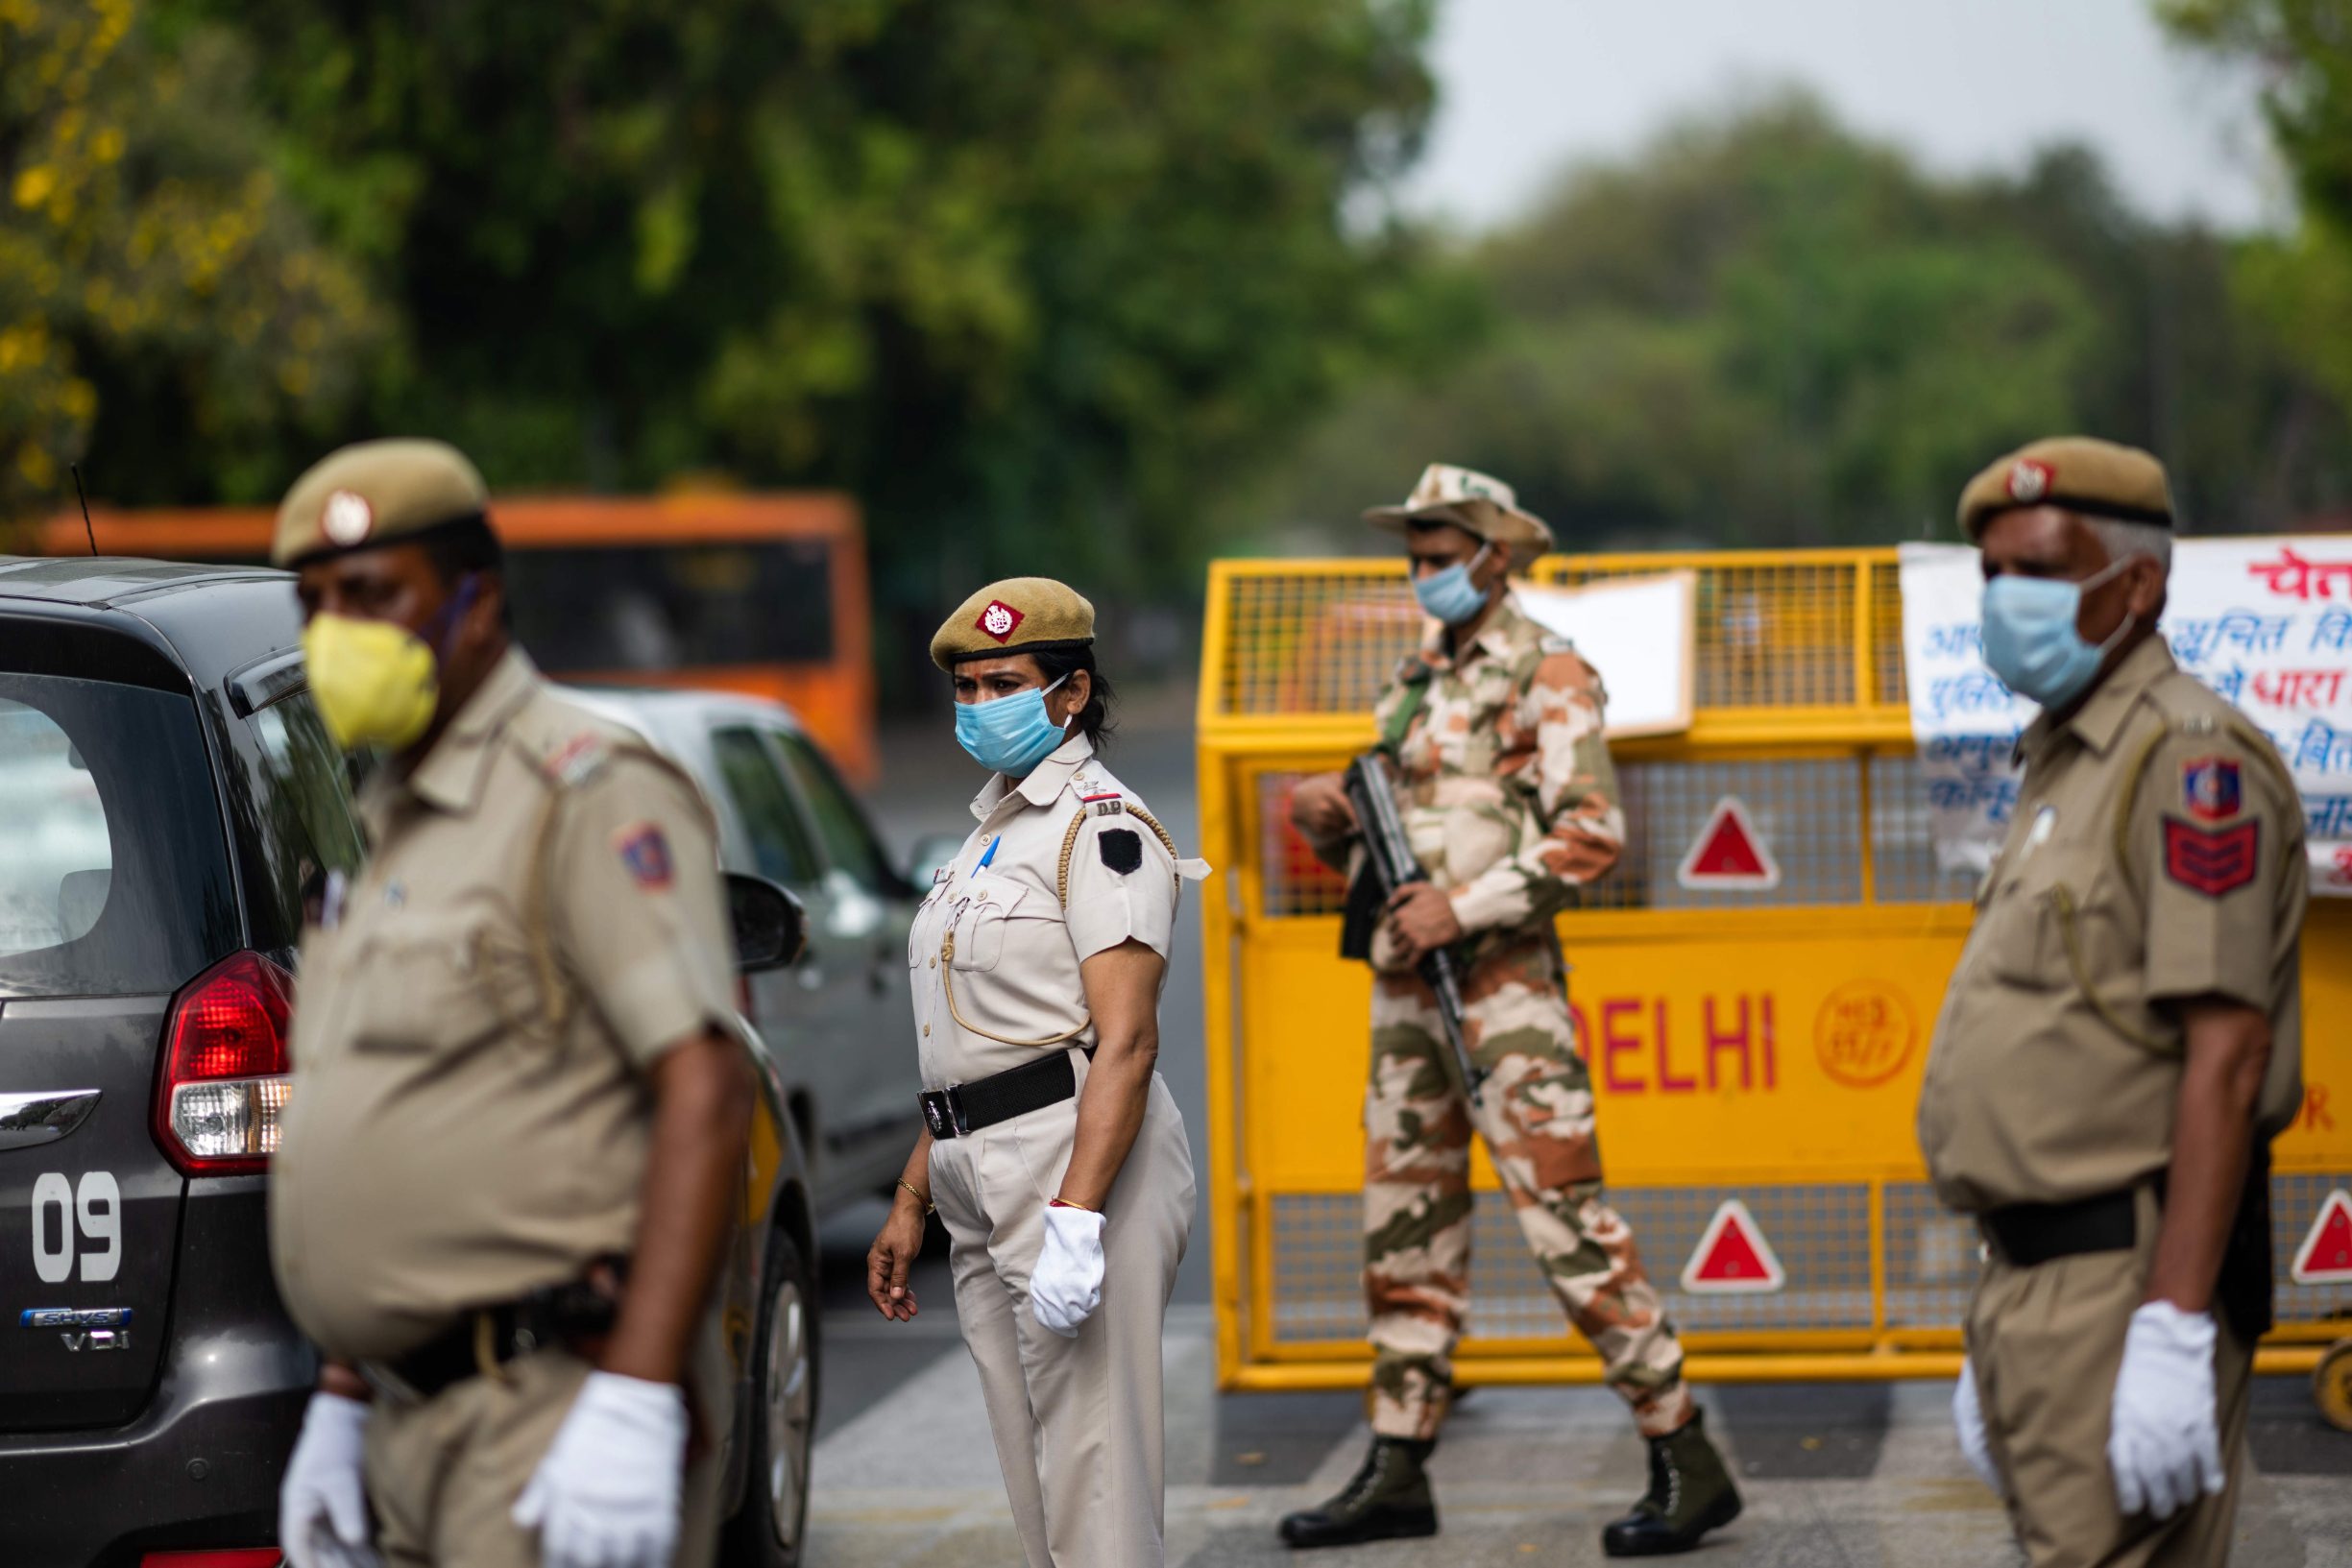 Security personnel stand guard at a checkpoint during a government-imposed nationwide lockdown as a preventive measure against the COVID-19 coronavirus in New Delhi on March 26, 2020. (Photo by Jewel SAMAD / AFP)